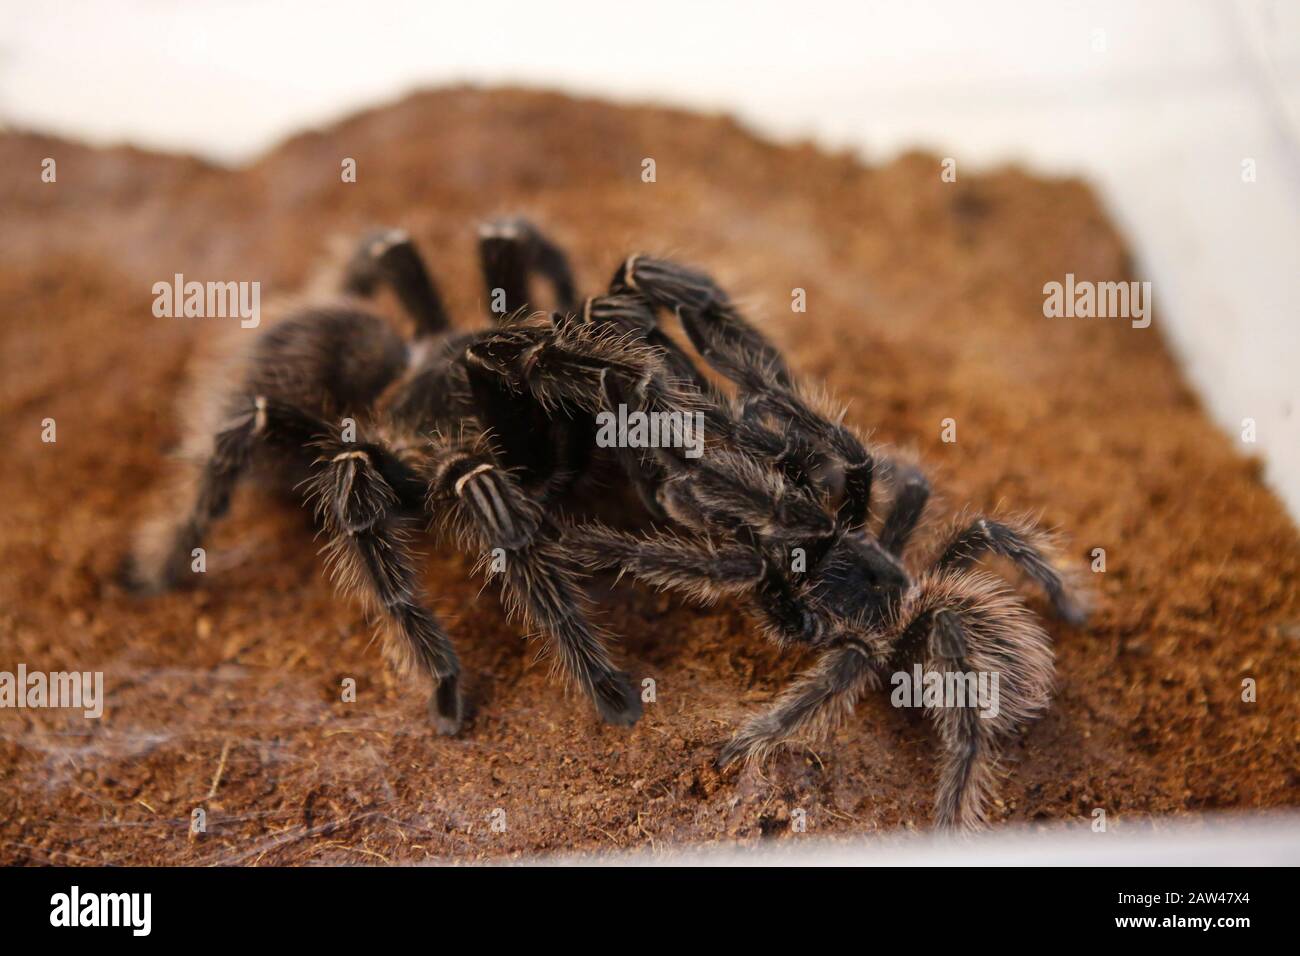 A number tarantulas from several species are seen in Lampung, Indonesia. Aldo Tan (tarantula collector) breeds thousands of tarantulas, the tarantula (Harpactira Pulchripes) from Africa, a rare species in the world. The price of a one-year-old tarantula reaches Rp 2.5 million per head. Stock Photo